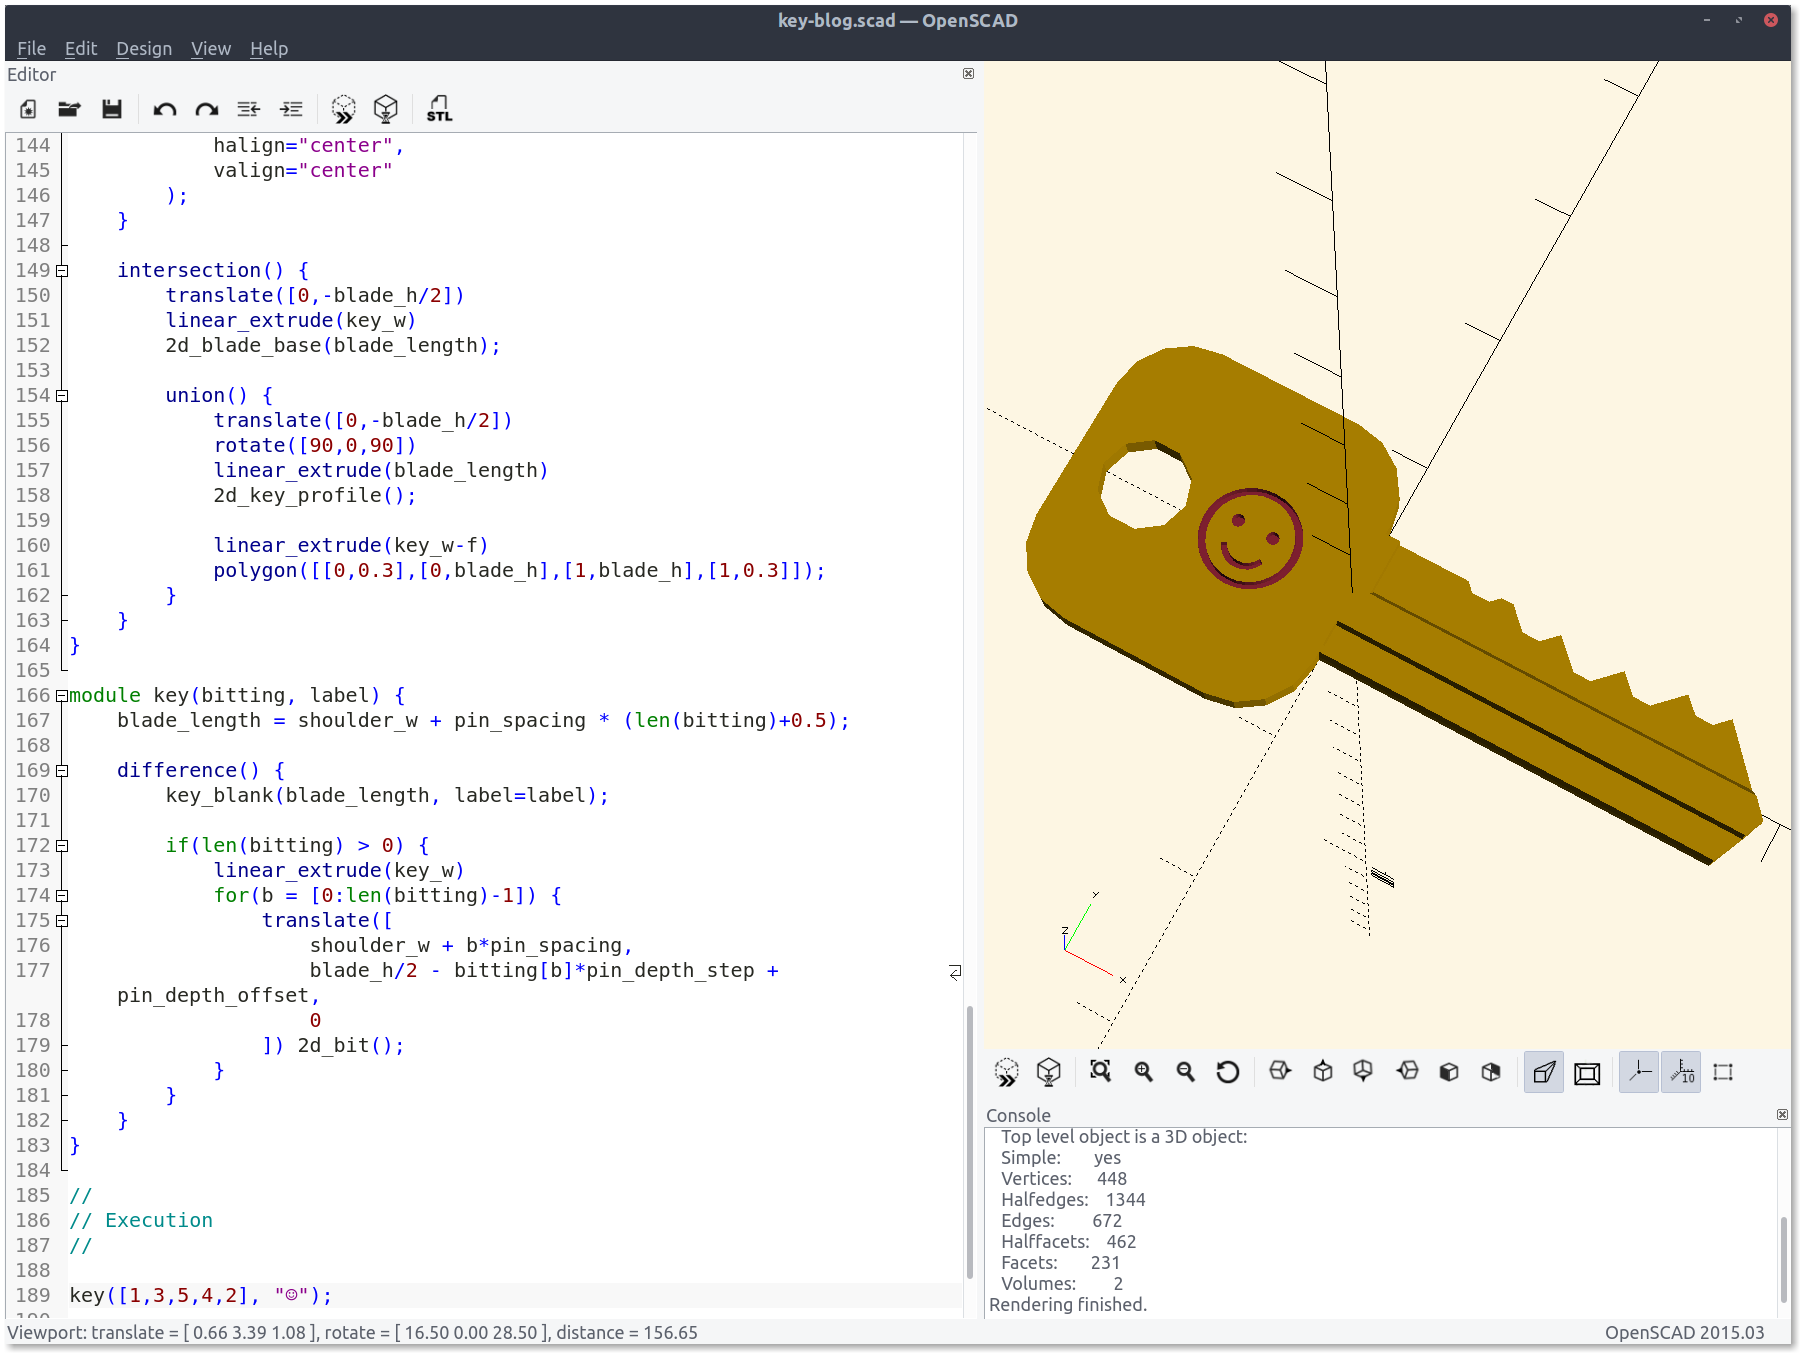 OpenSCAD interface, showing a render of a key and part of the code that generates it